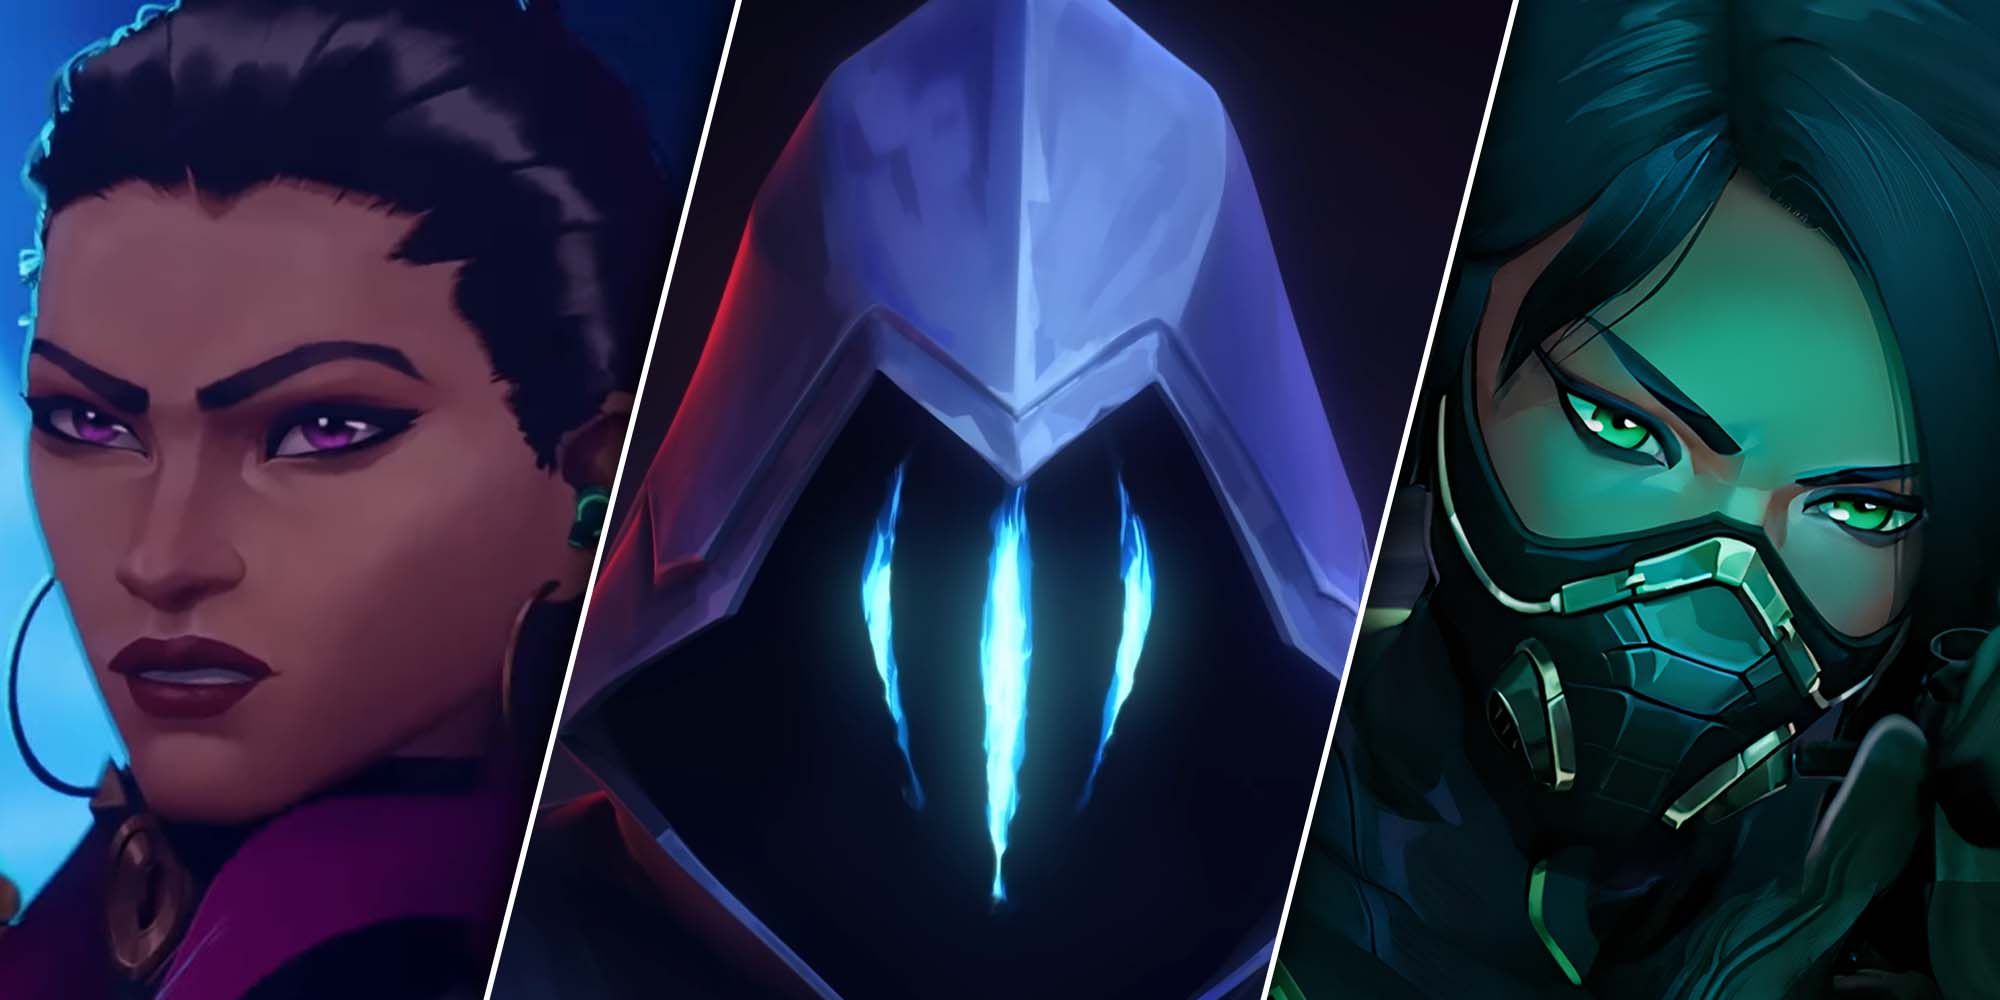 split images of Reyna, Omen and Viper from Valorant's cinematics